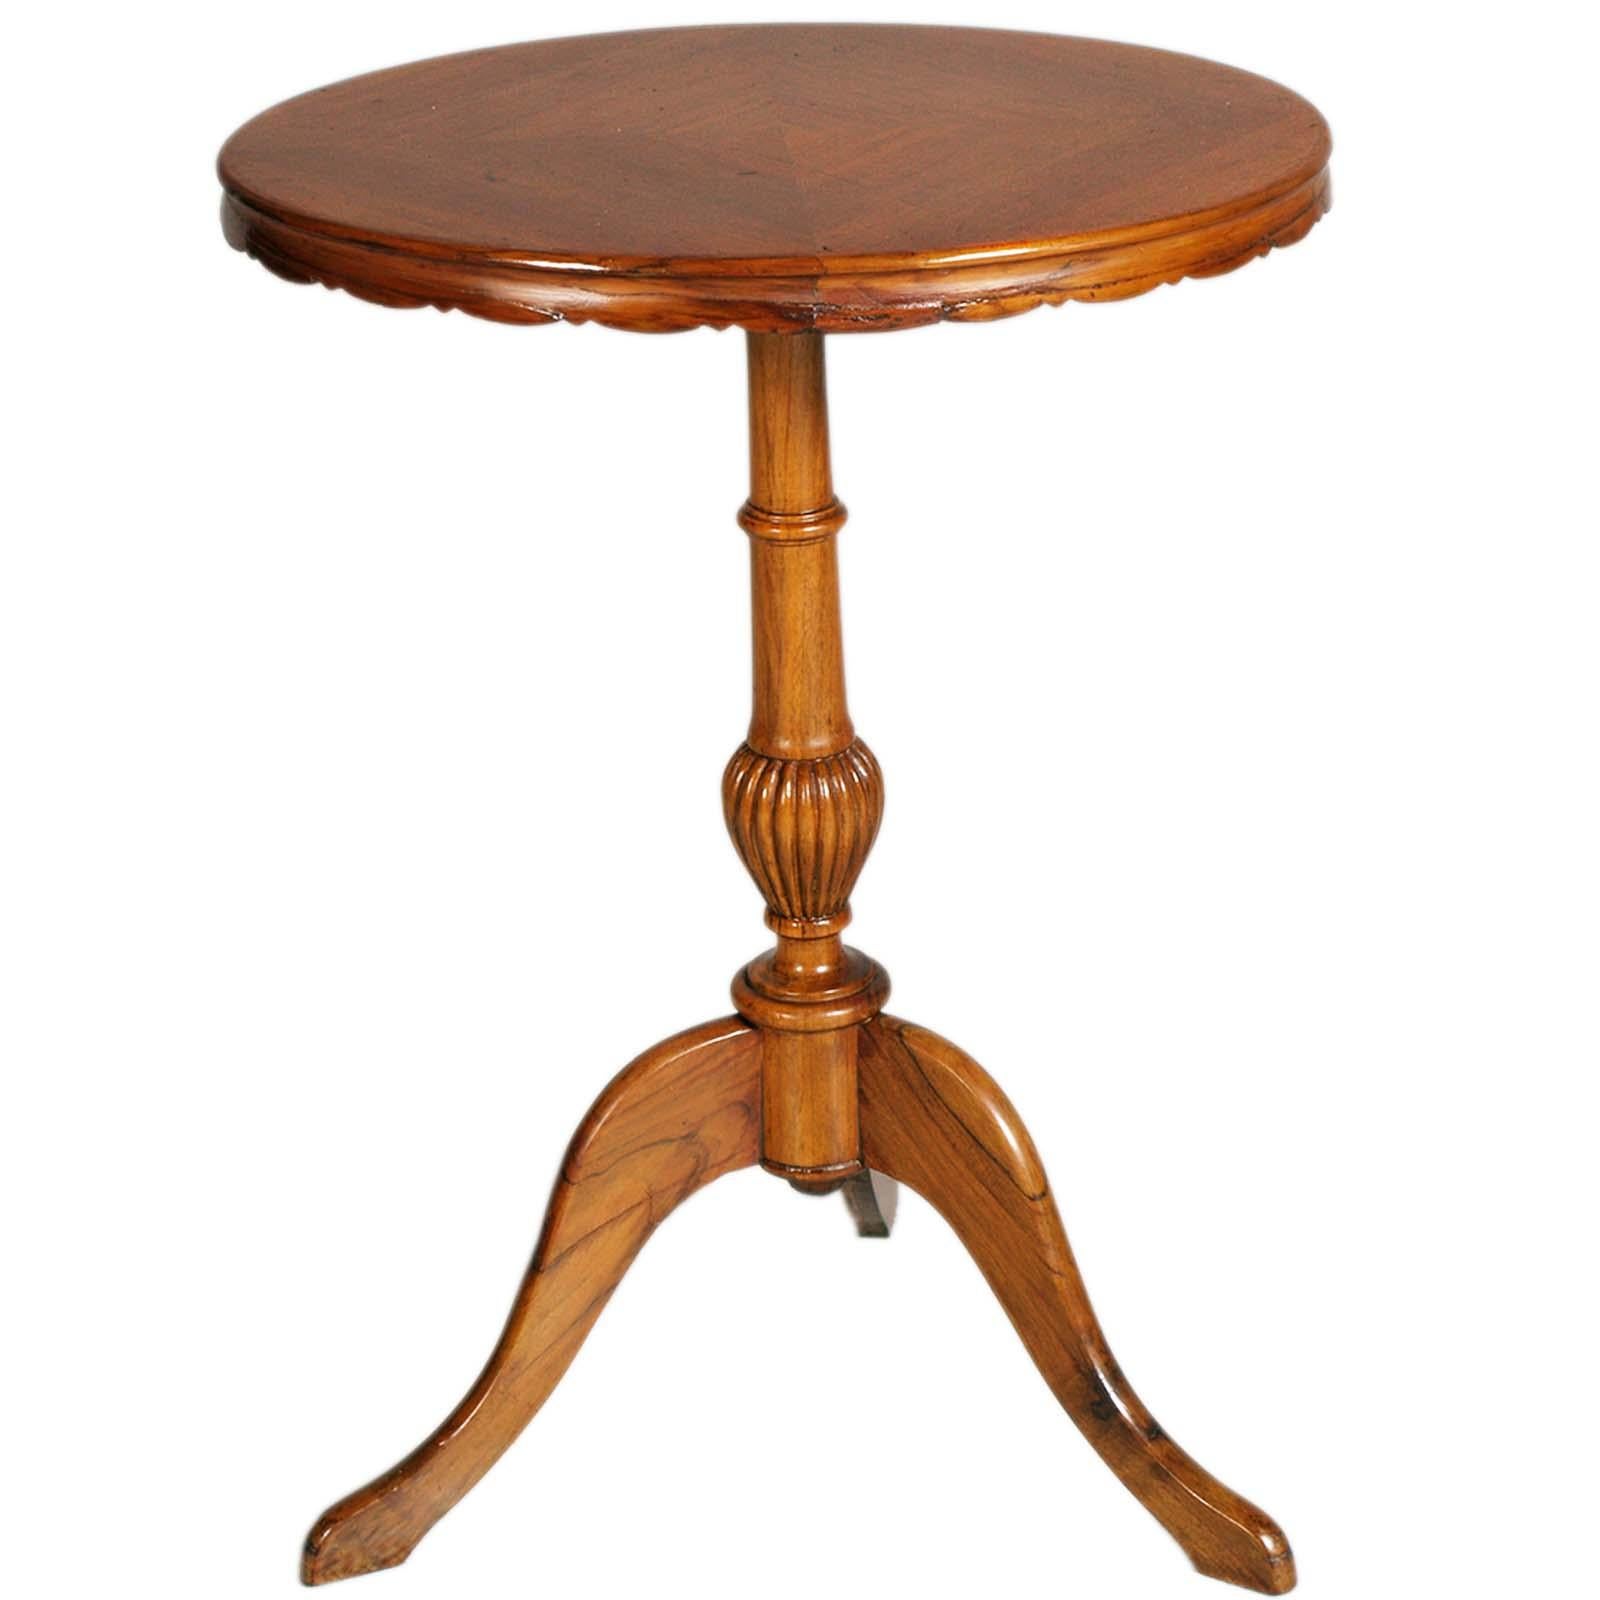 Italian 1920s Oval Tripod Neoclassical Coffee Table in Blond Walnut with Veneered Top For Sale